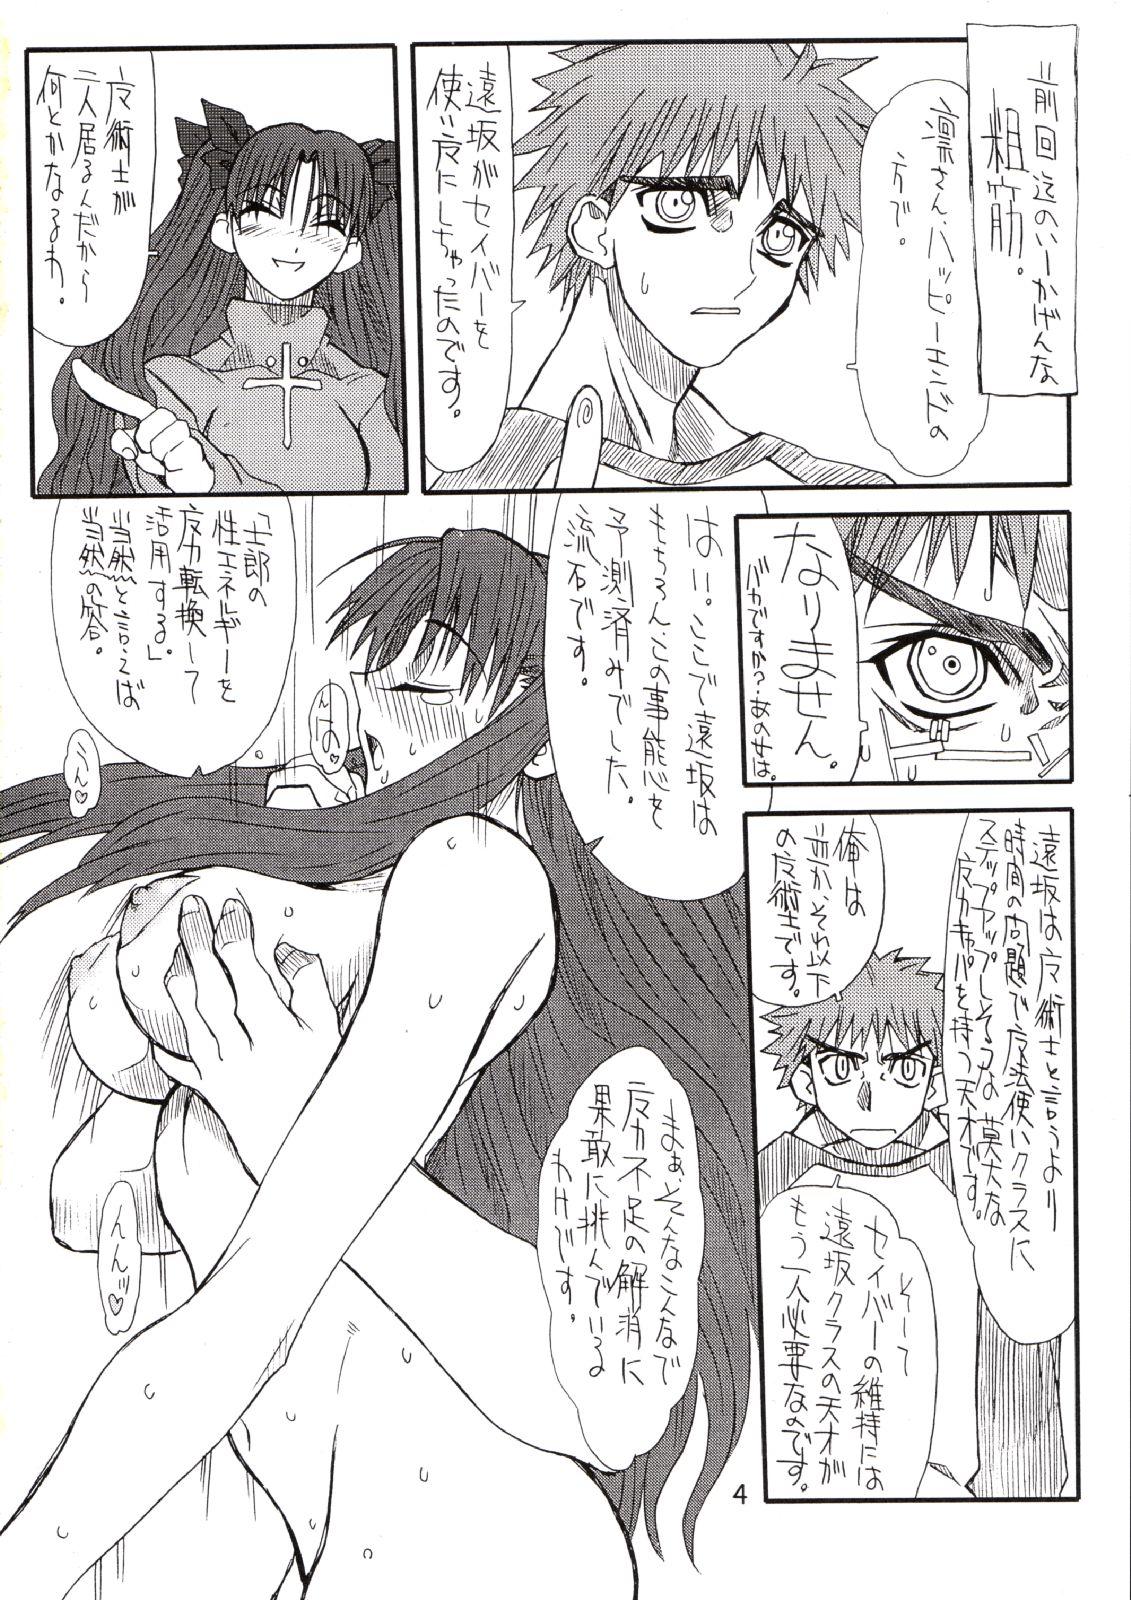 Dyke Corn 2 - Fate stay night Amateur Sex - Page 3